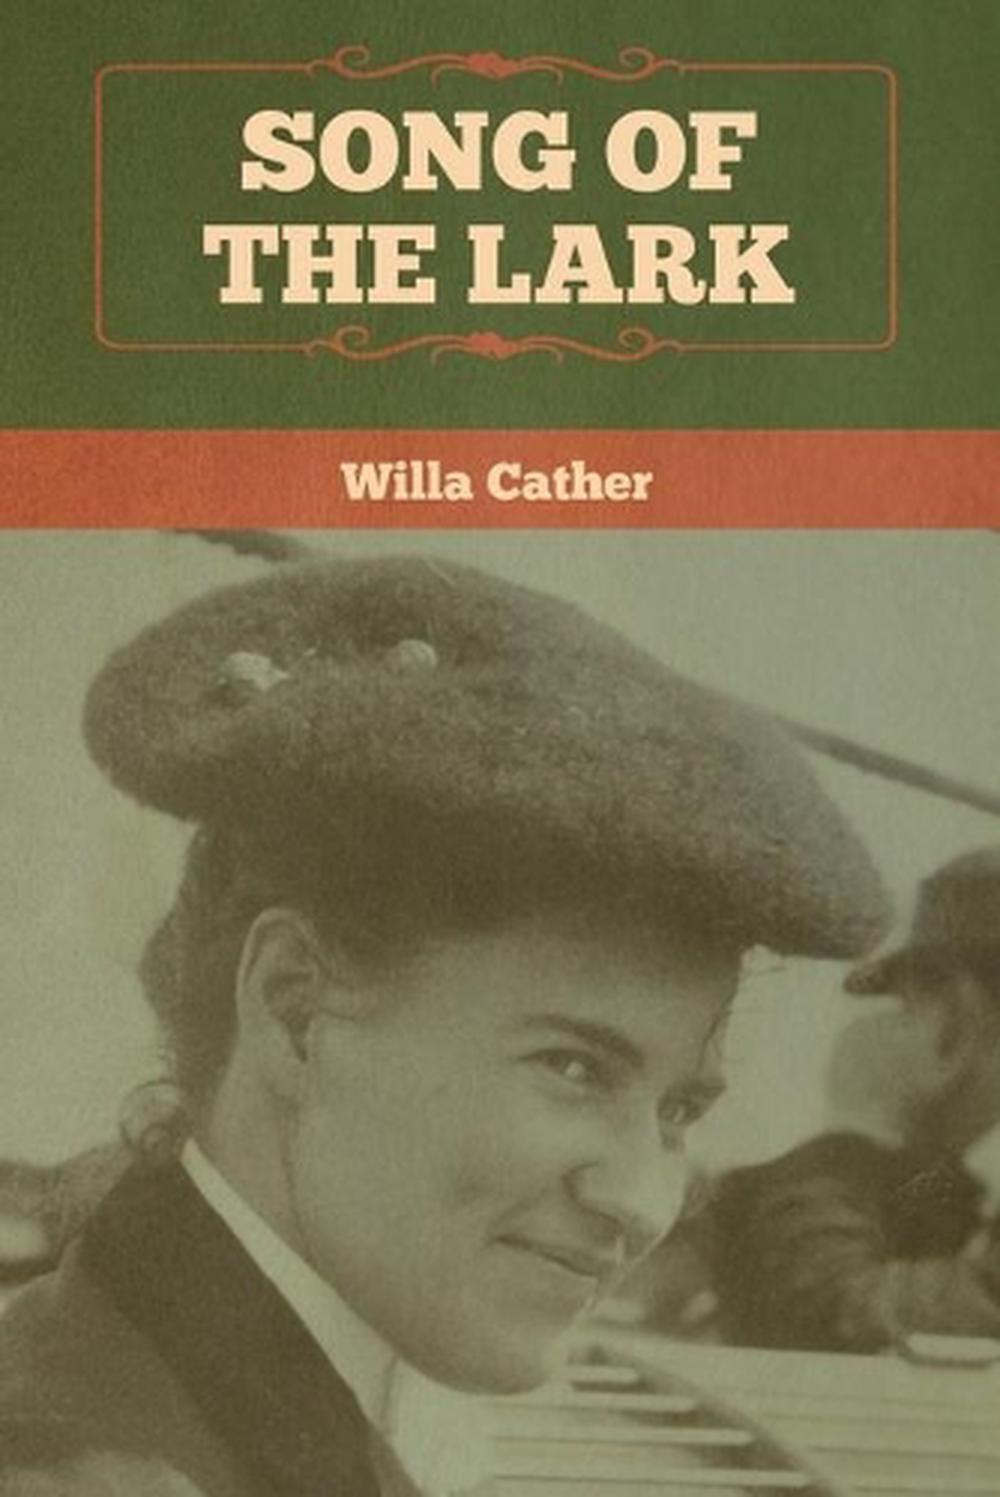 the song of the lark willa cather review